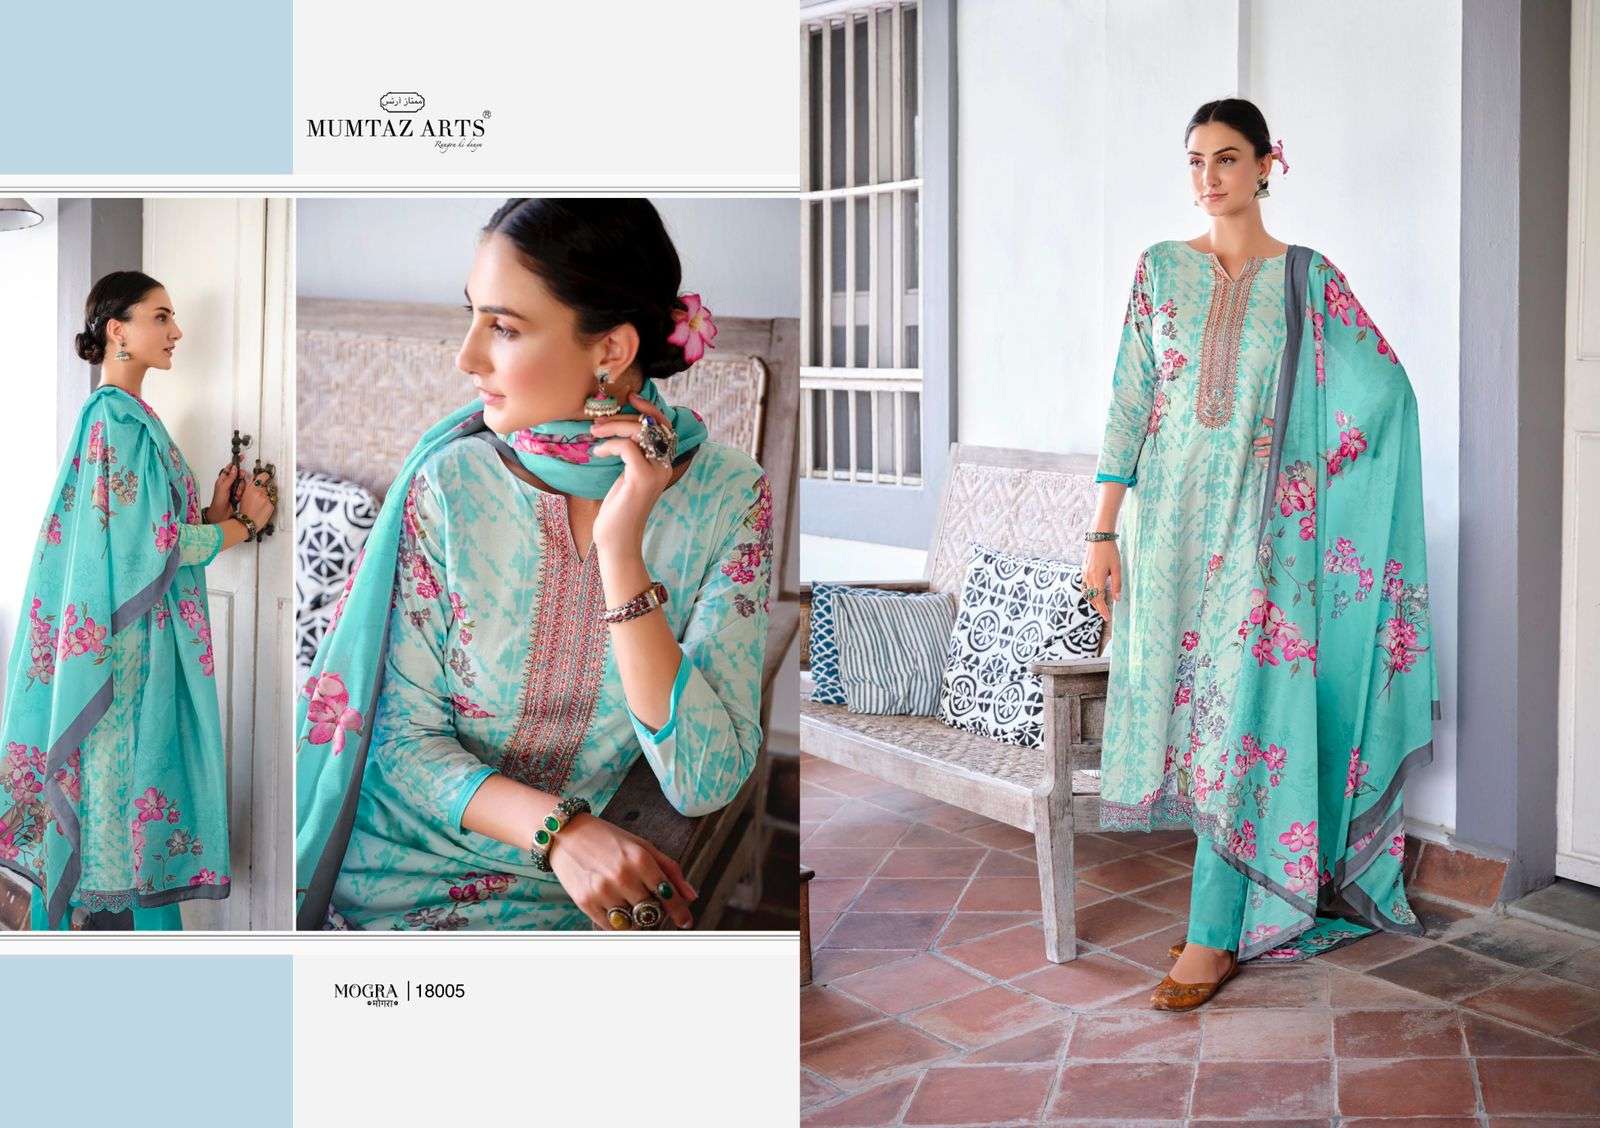 MUMTAZ ARTS MOGRA DESIGNER EXCLUSIVE EMBROIDERY WITH LAWN COTTON DIGITAL PRINTED SUITS IN WHOLESALE RATE